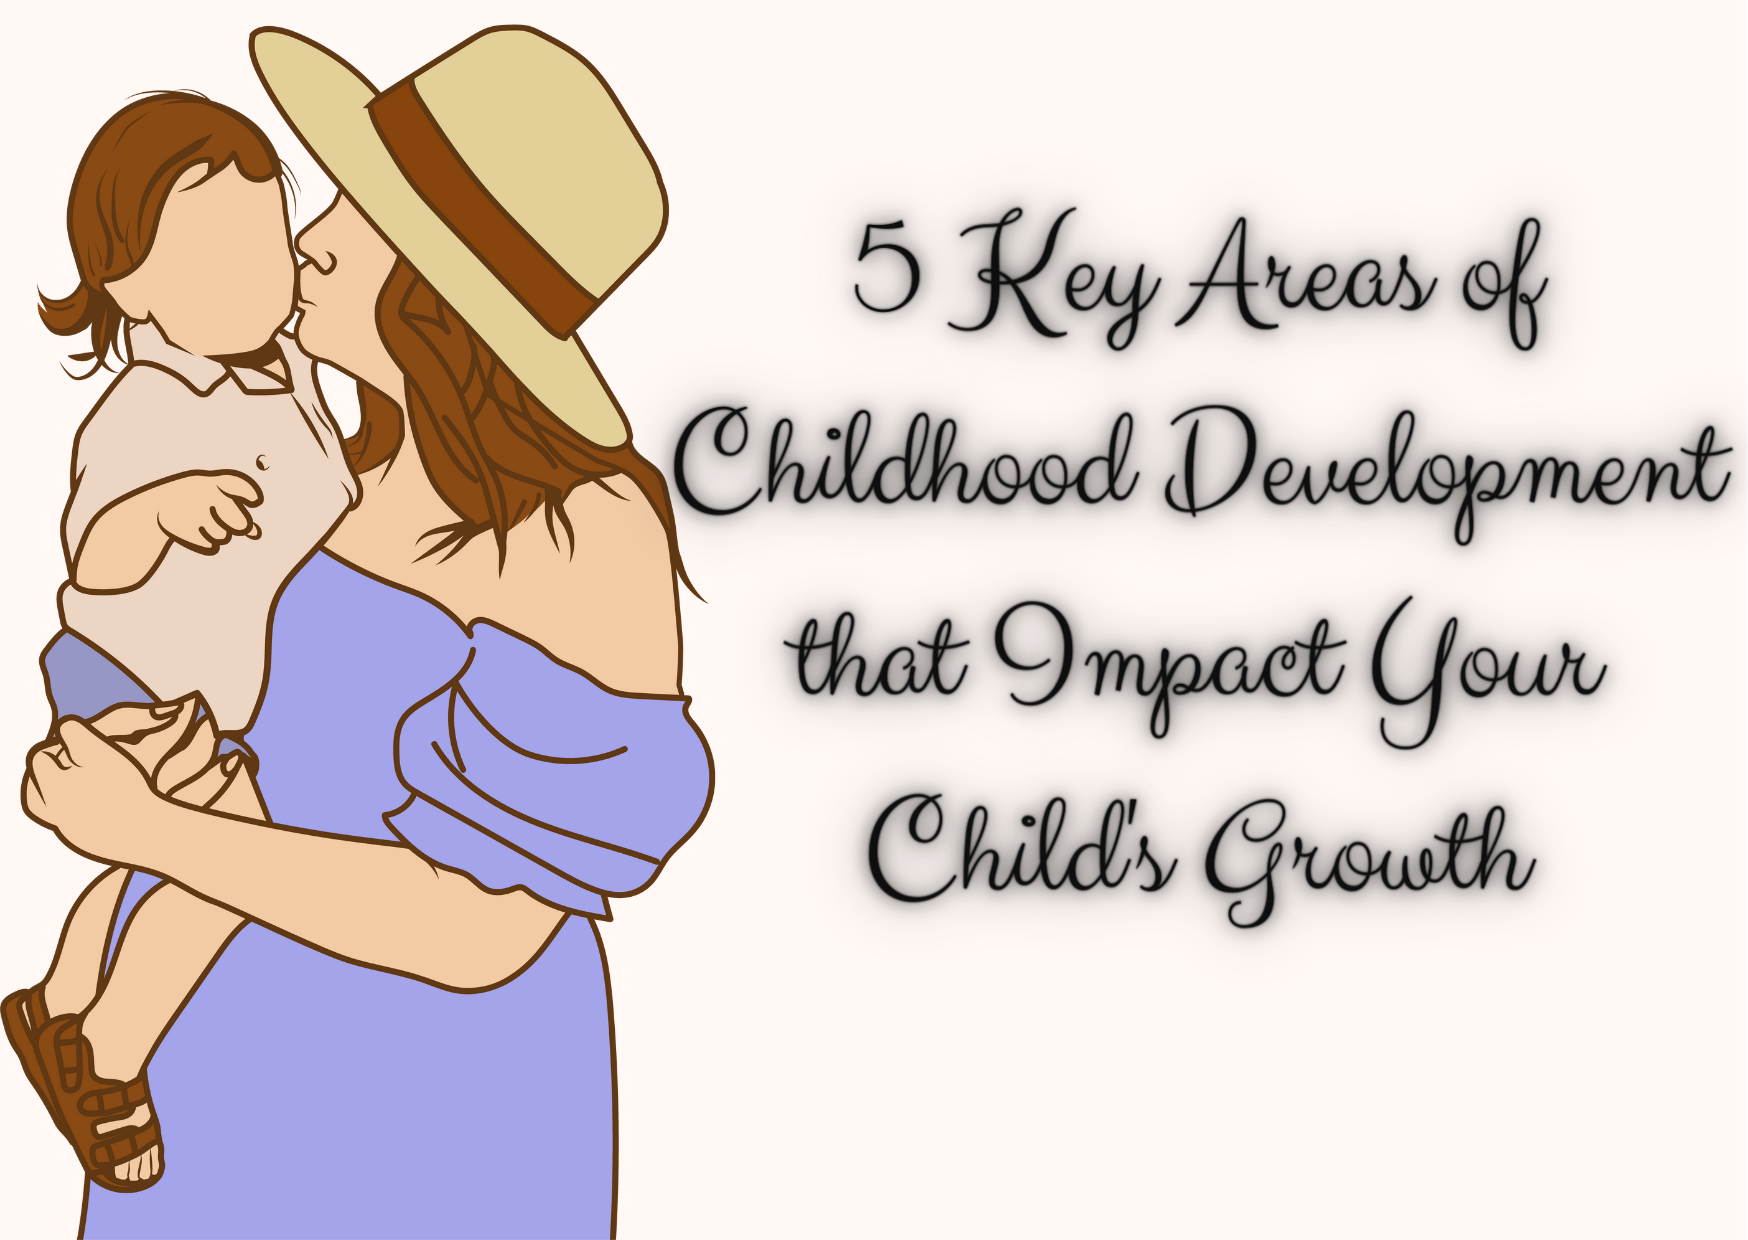 5 Key Areas of Childhood Development that Impact Your Child's Growth